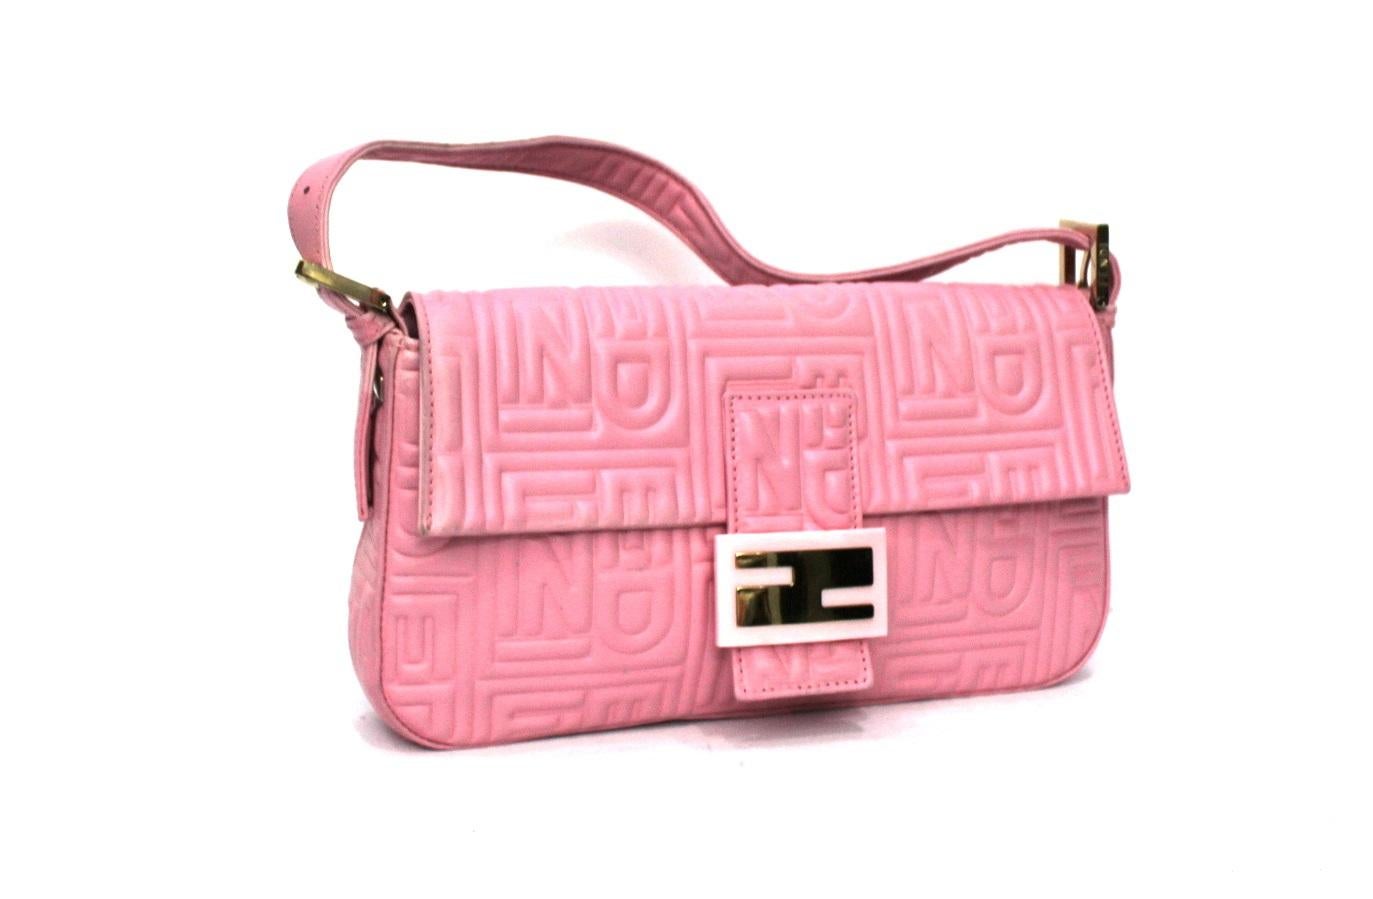 Fendi baguette in pink leather with golden hardware.
Magnetic button closure, internally quite large. Equipped with an adjustable leather handle.
The bag has slight signs of wear.